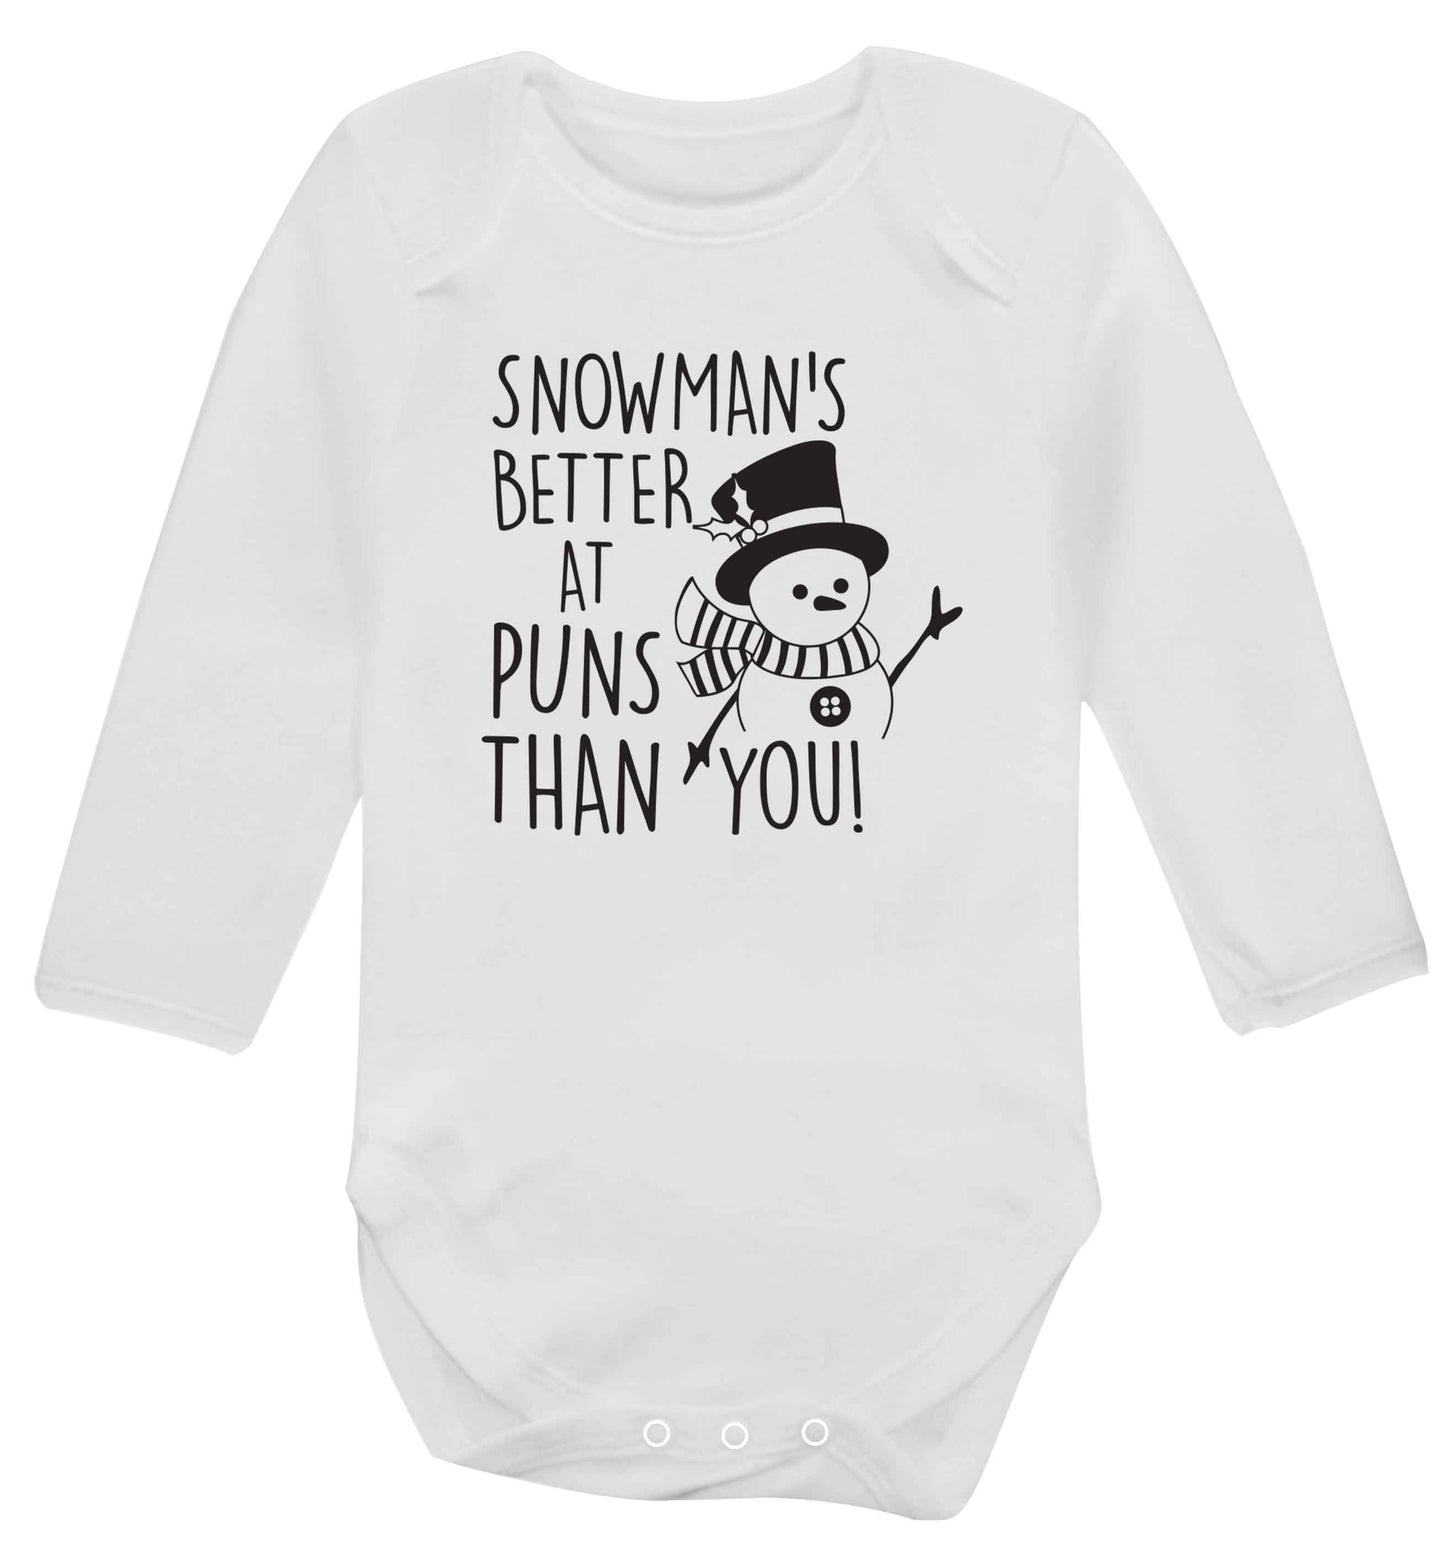 Snowman's Puns You baby vest long sleeved white 6-12 months